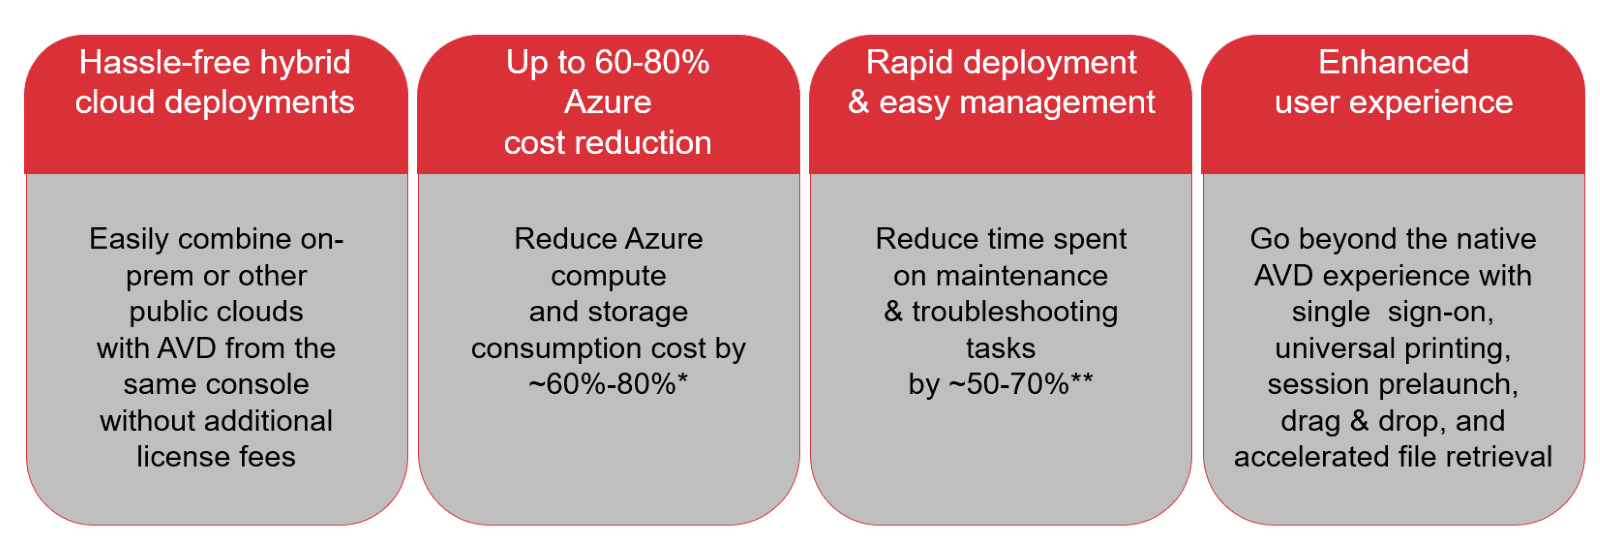 Hassle-free hybrid cloud deployments to save up to 80% on costs, rapid deployment, easy management and enhanced UX in Parallels RAS